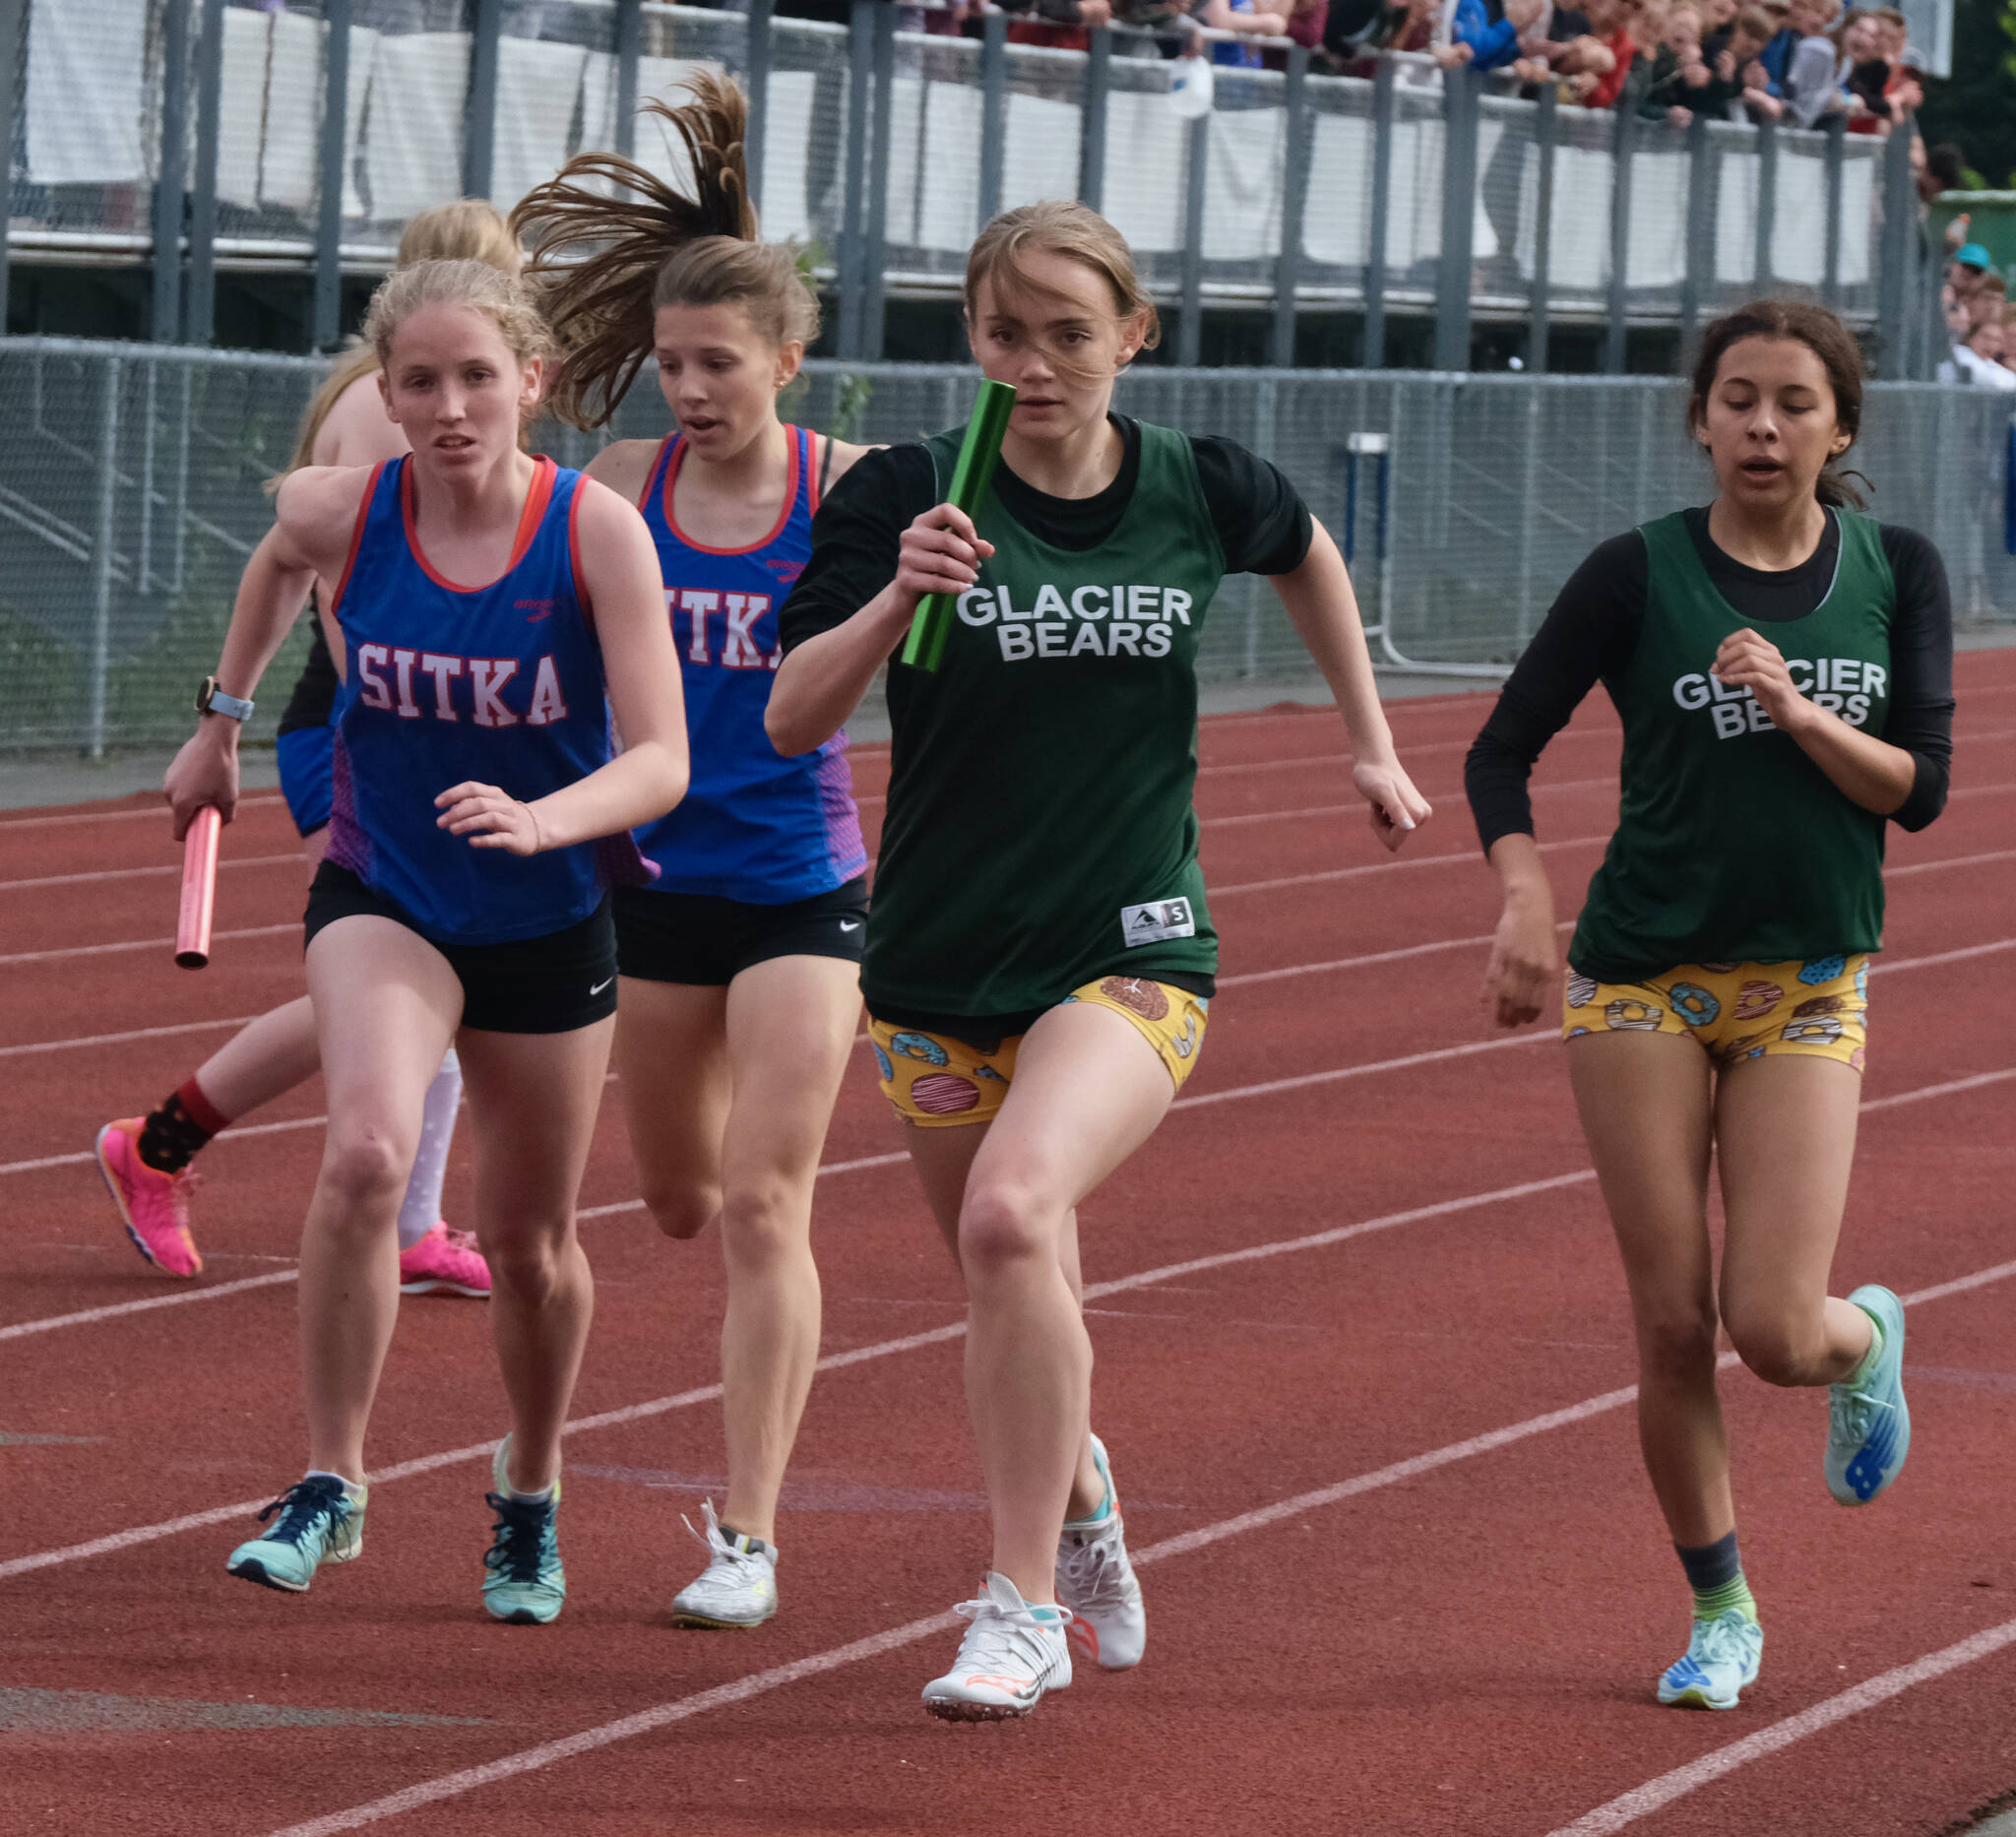 Sitka sophomore Clare Mullin and Haines senior Avari Getchell start the anchor leg of the Division II girls 4x400 relay after taking baton passes from Sitka freshman Natalie Hall and Haines sophomore Ari’el Godinez Long during the Region V Track & Field Championships. Sitka performed well at the state championship this weekend, earning a Division II title. (Klas Stolpe / Juneau Empire)